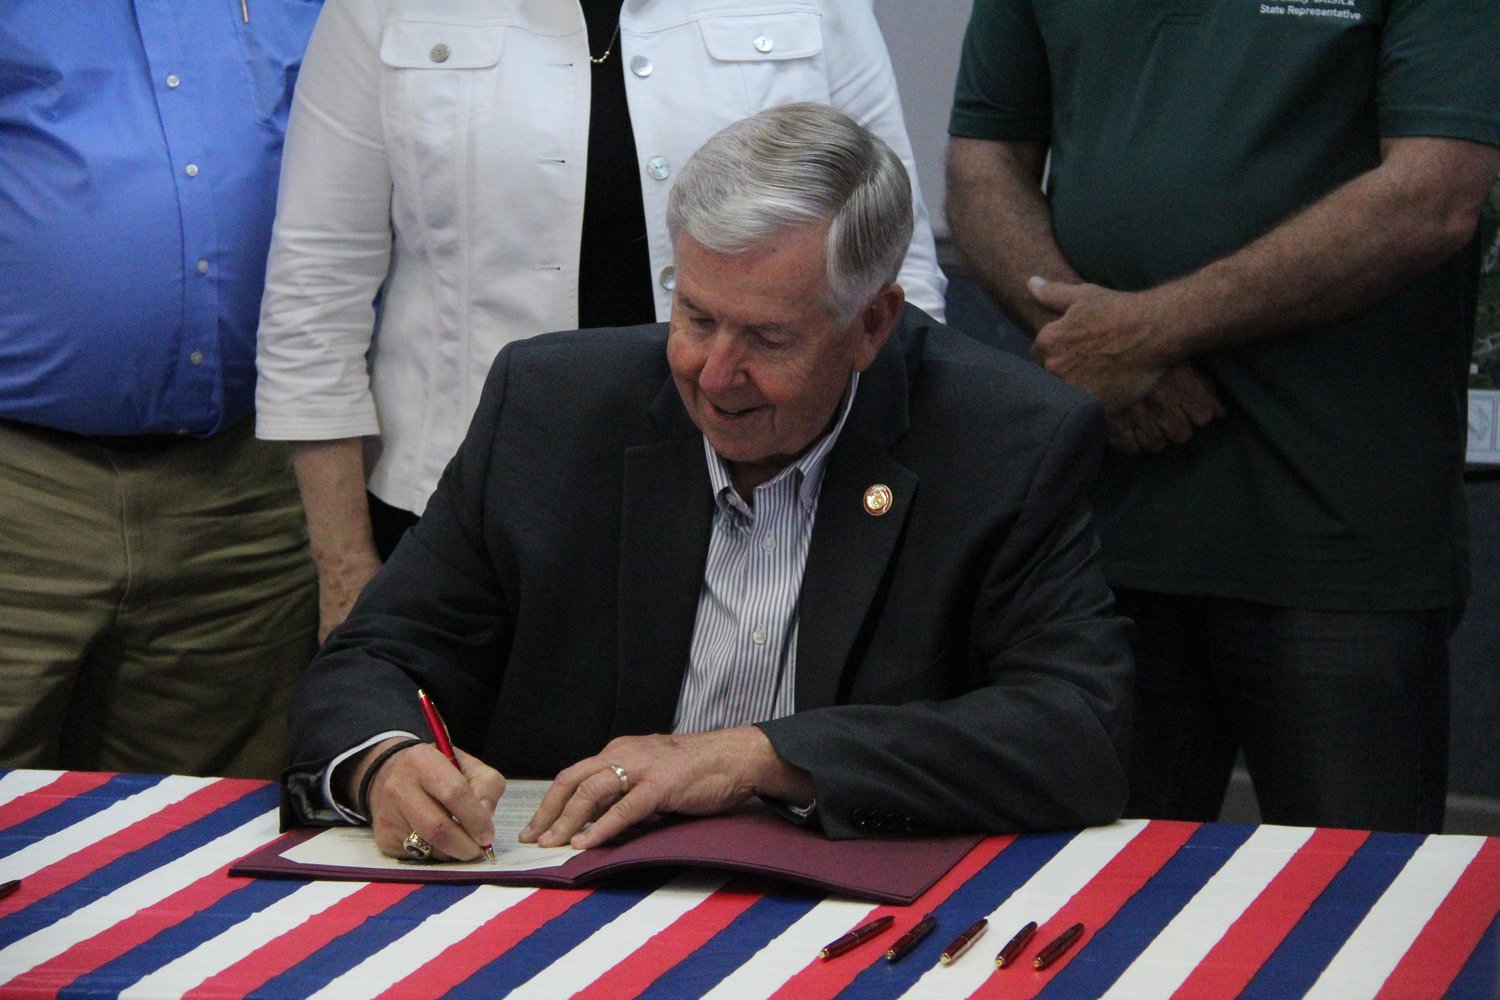 Missouri Gov. Mike Parson signs SCR 7, a resolution that will contribute up to $24 million toward the East Locust Creek Reservoir project, in Milan on Thursday.